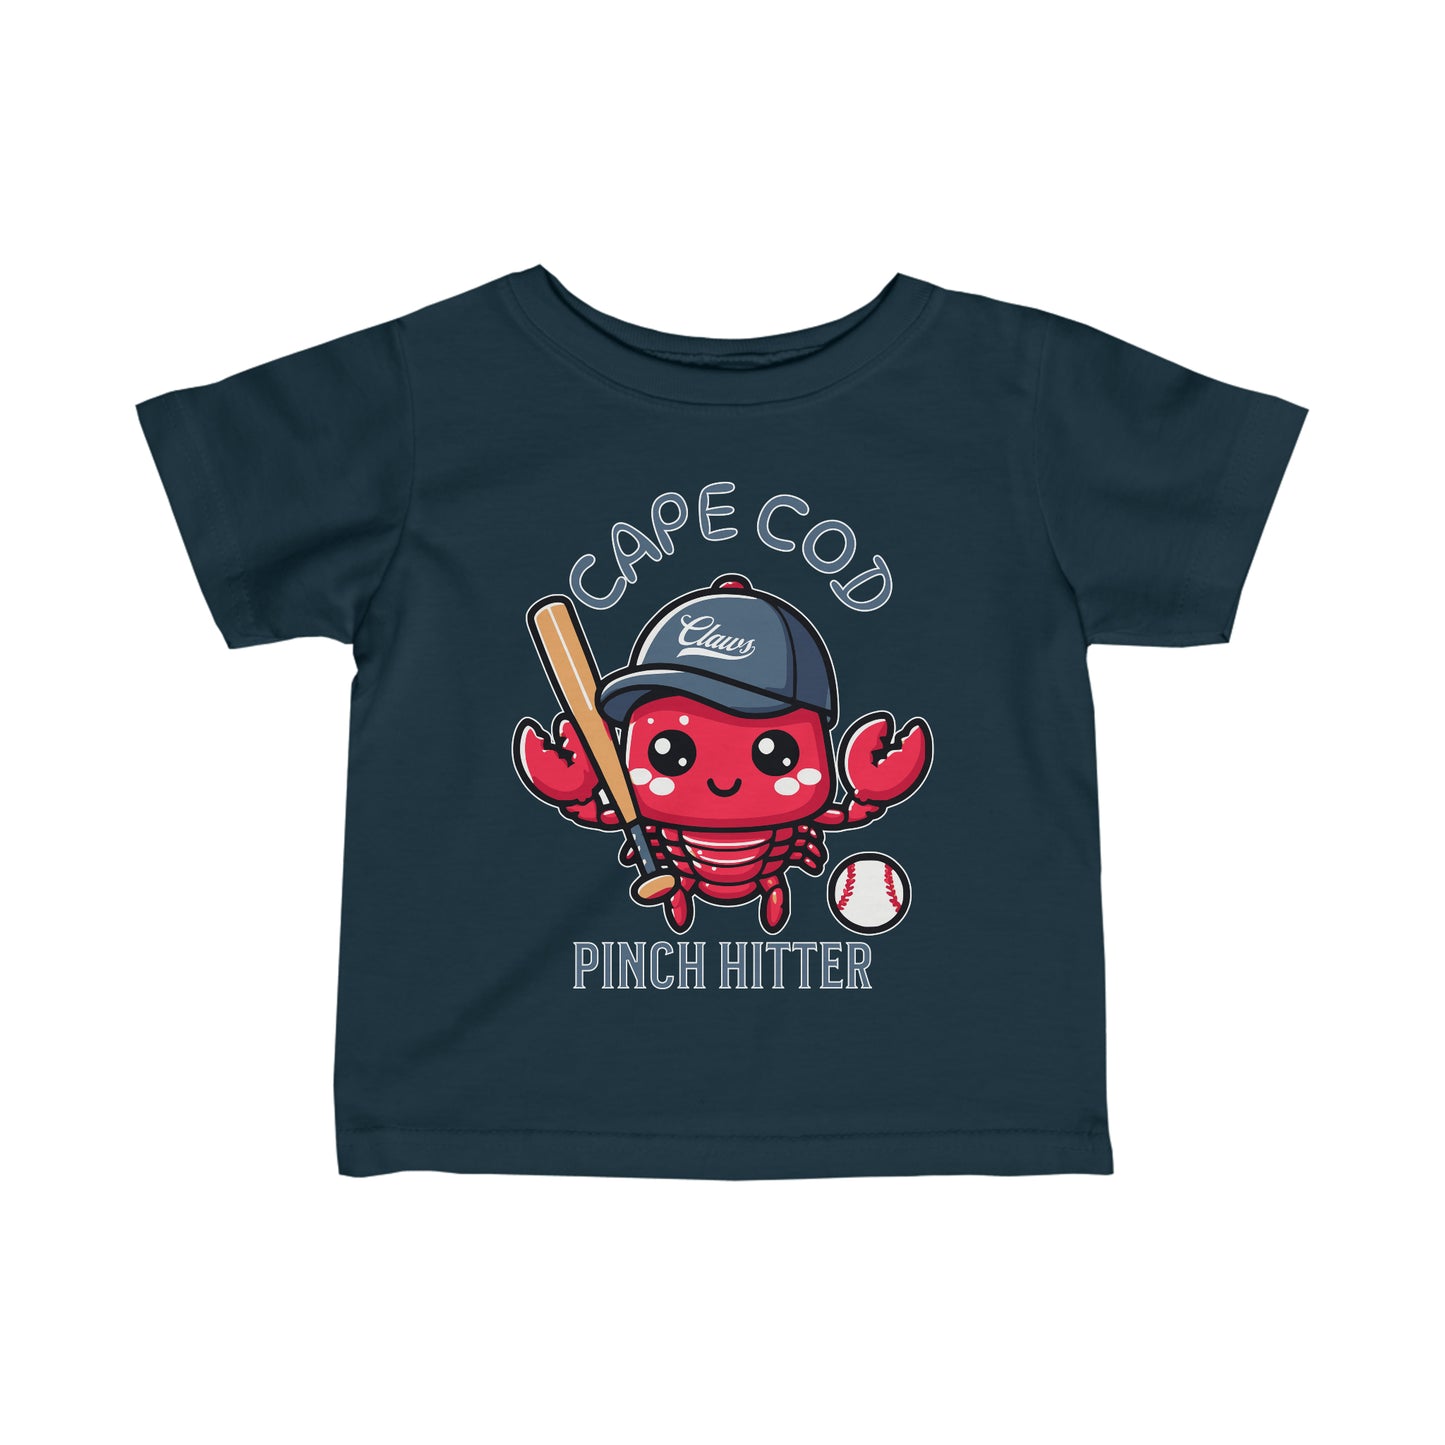 Cape Cod Lobster Infant Fine Jersey T-Shirt